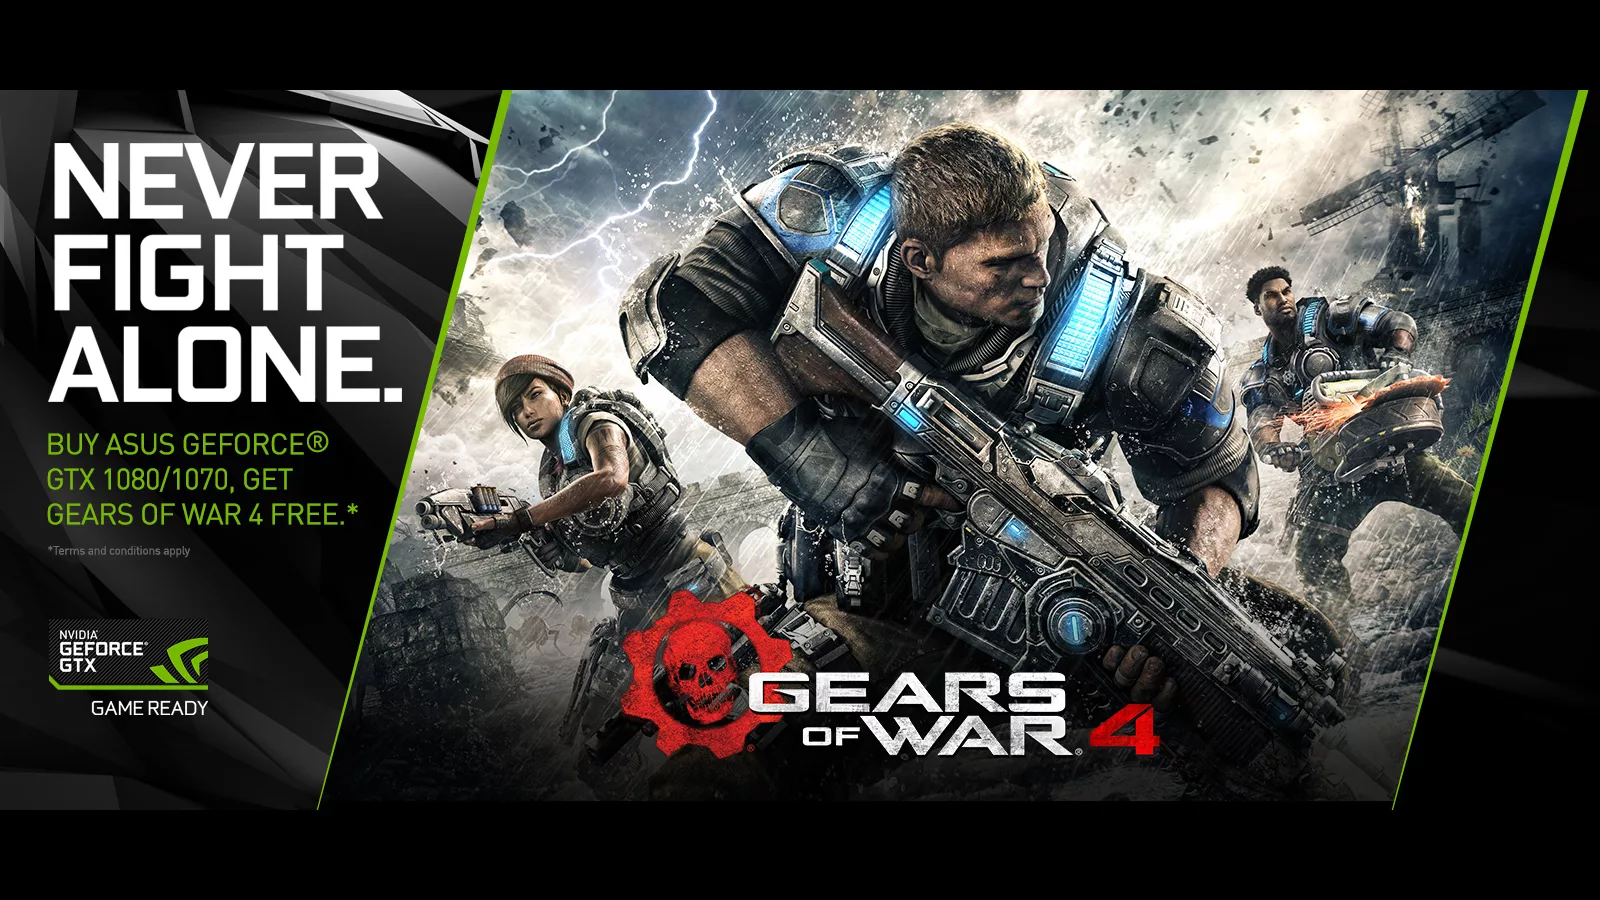 Never Fight Alone with New Xbox One S Gears of War 4 Bundles